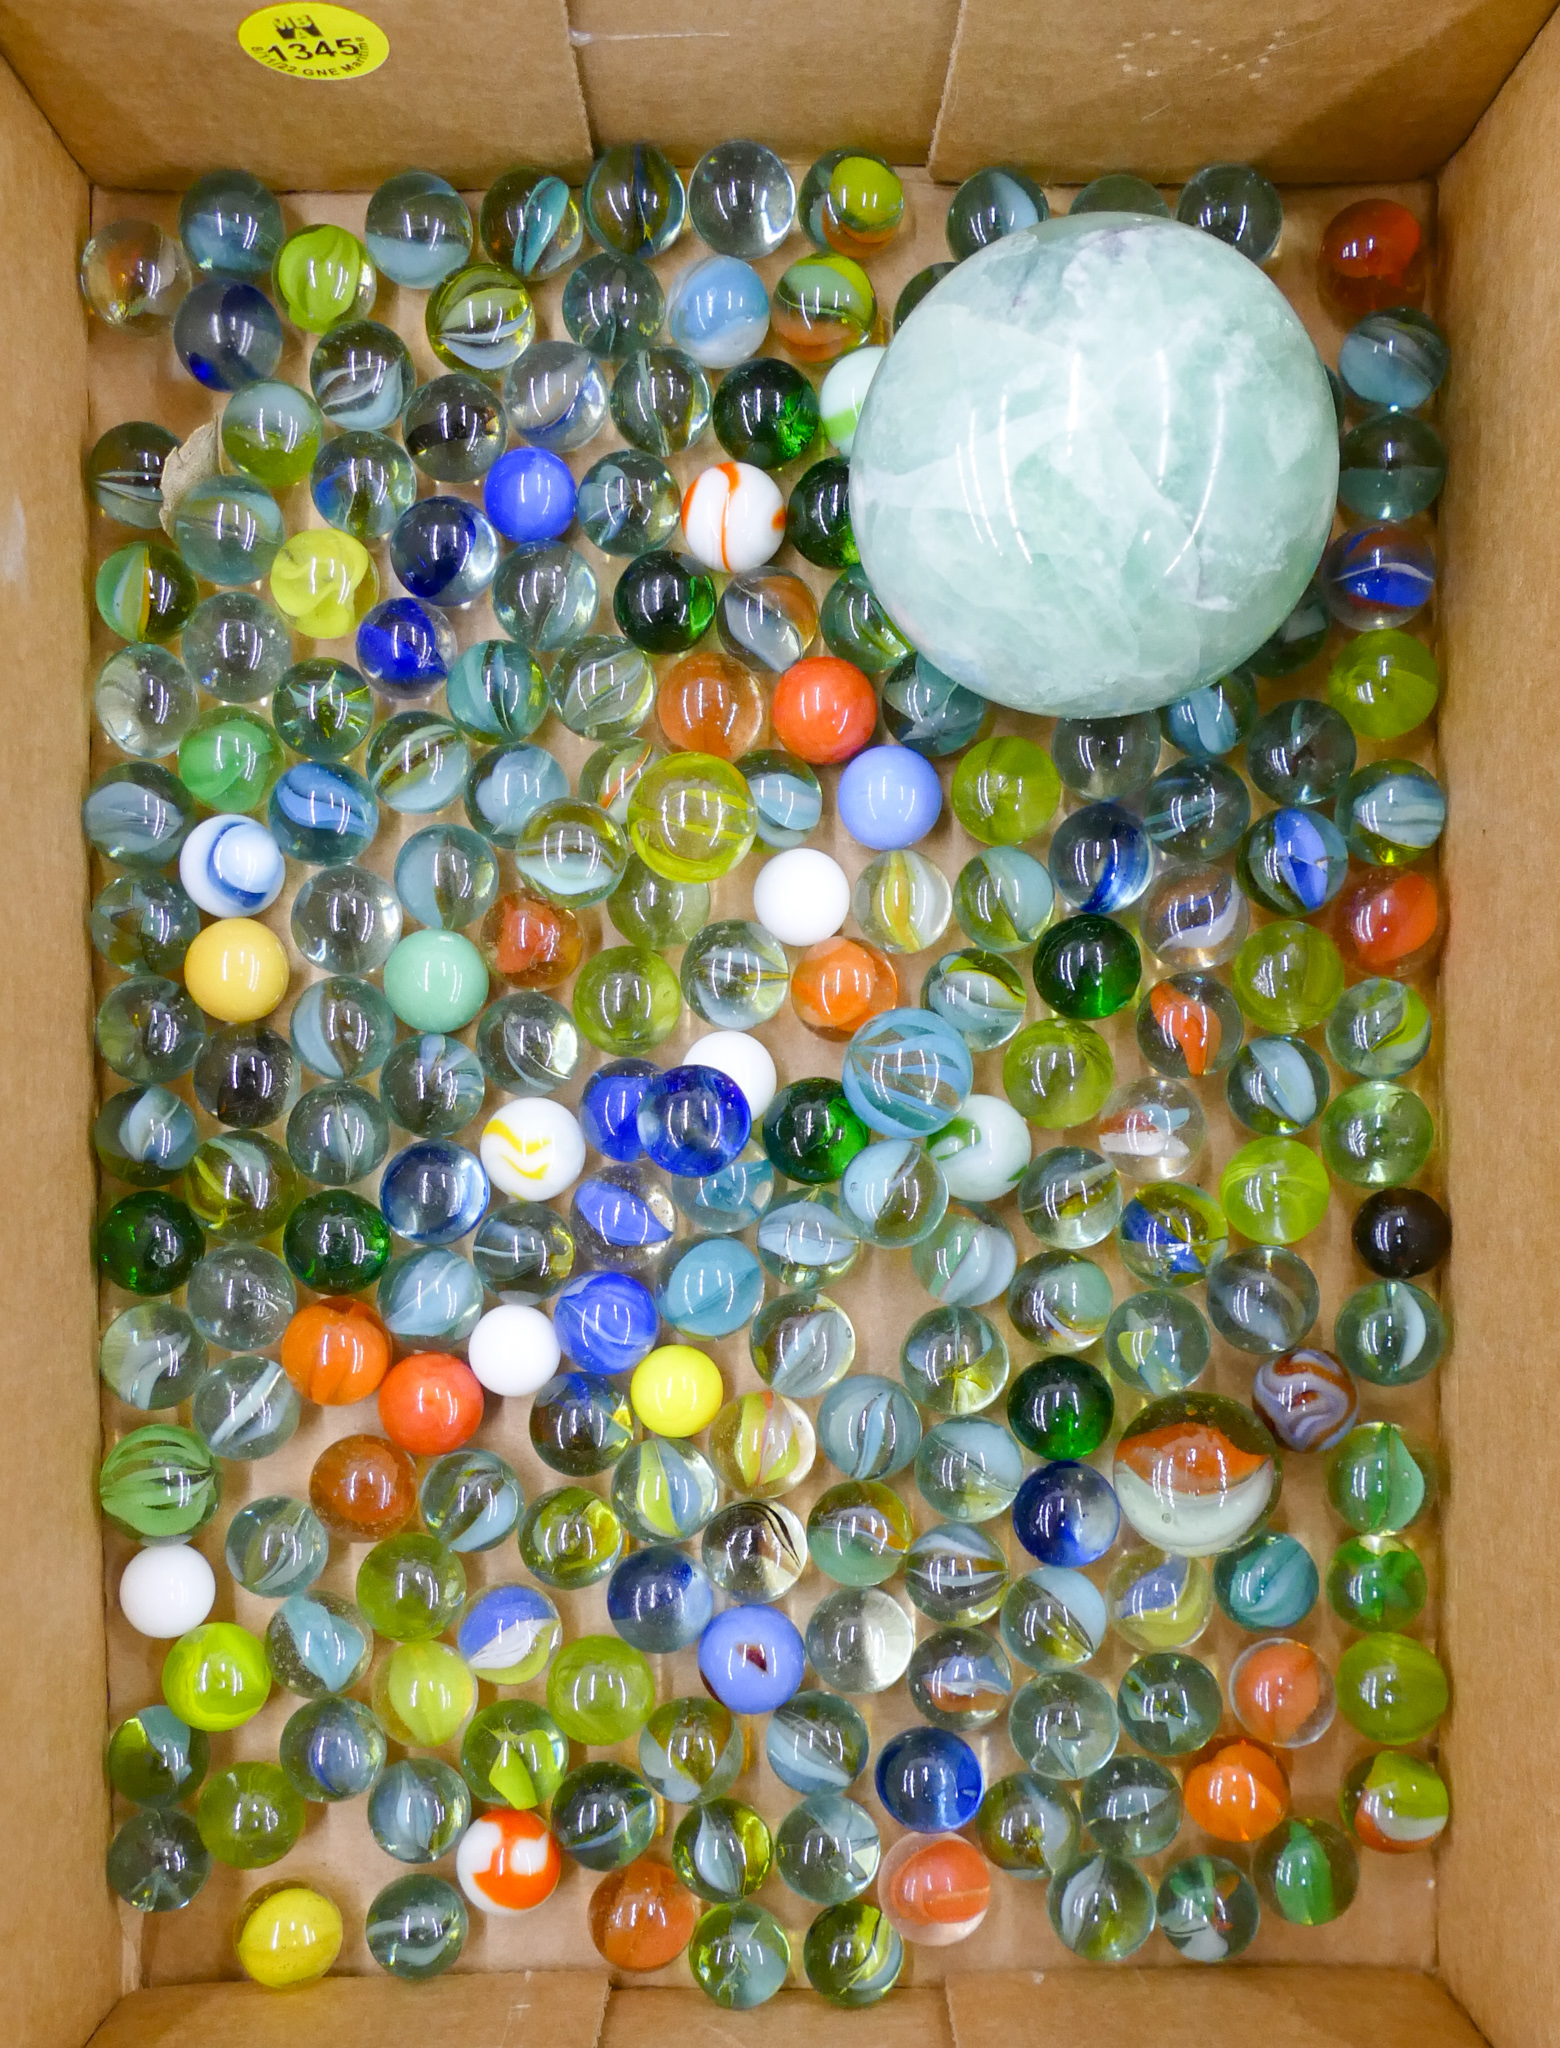 Box Old Marbles Etc.